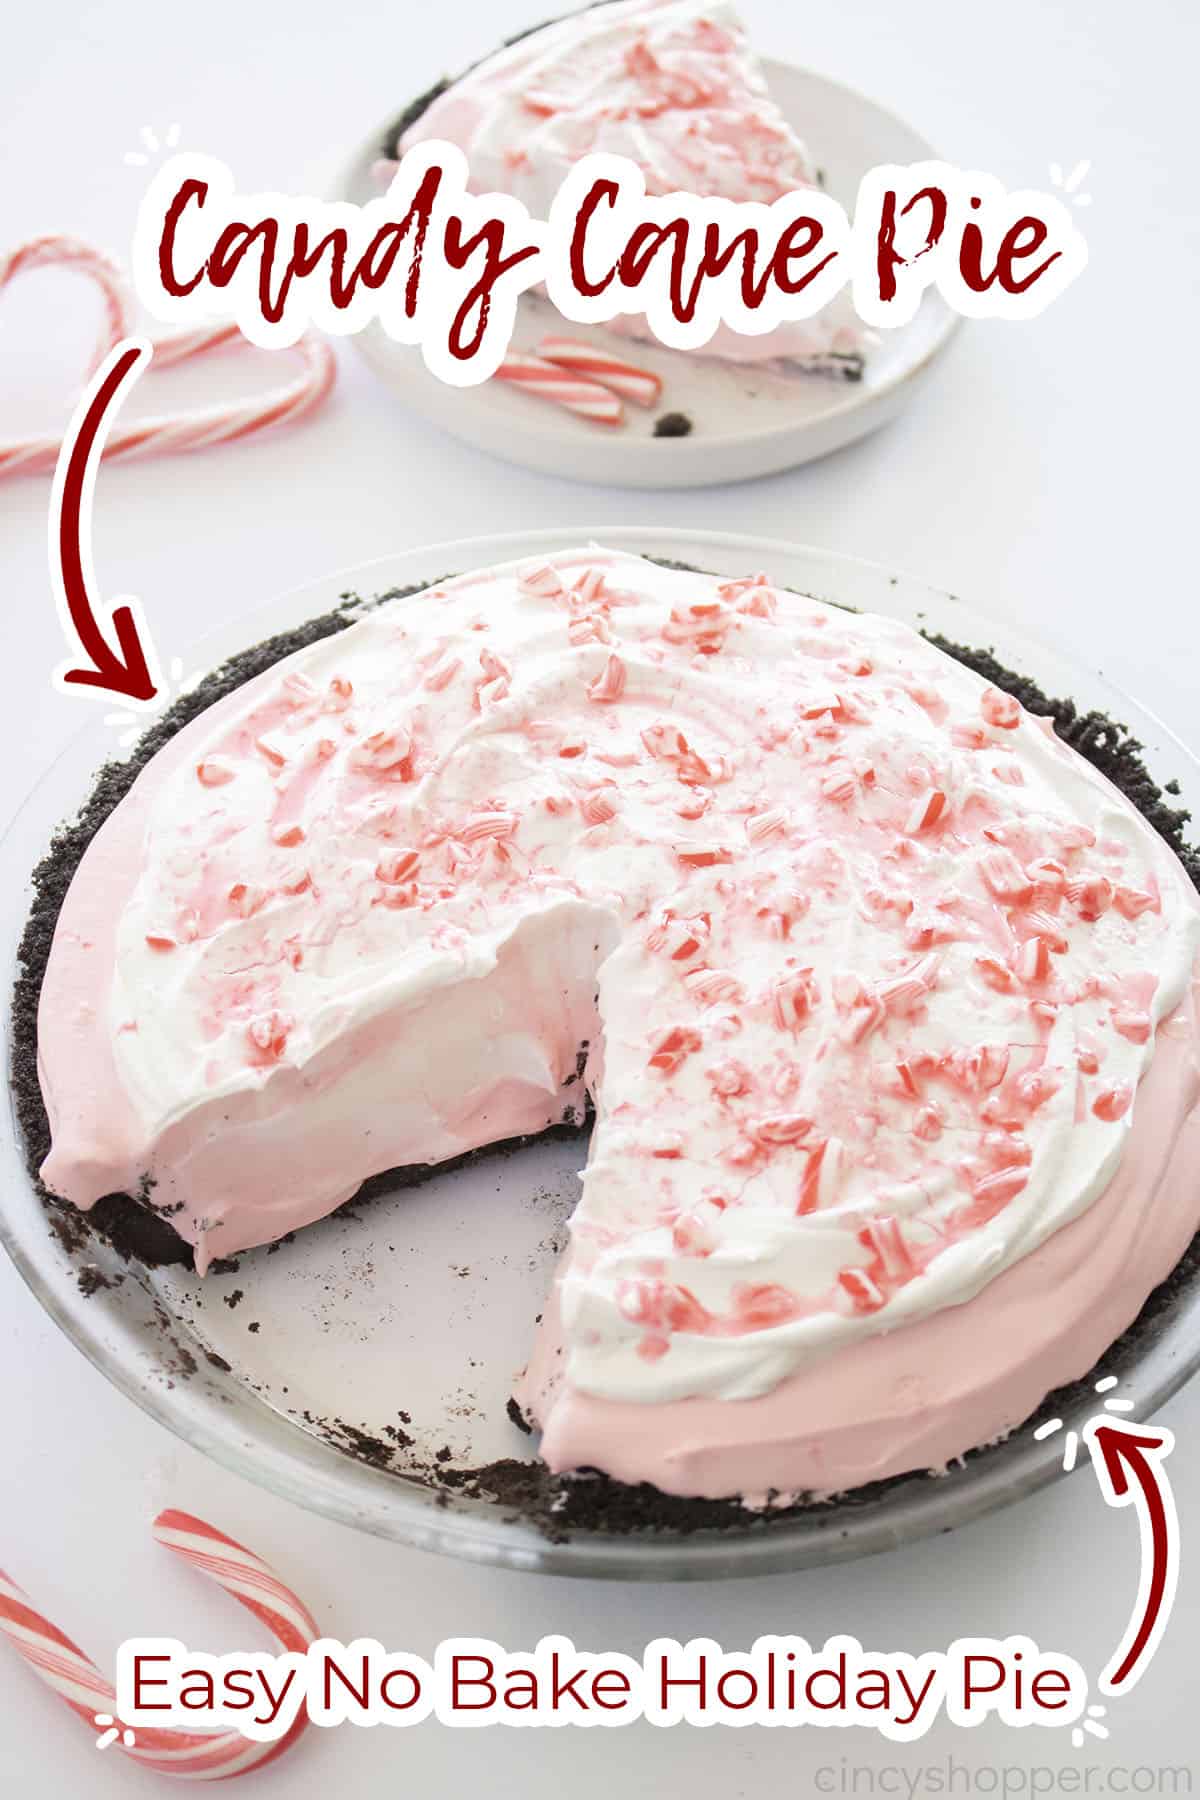 Text on image Candy Cane Pie Easy No Bake Holiday Pie